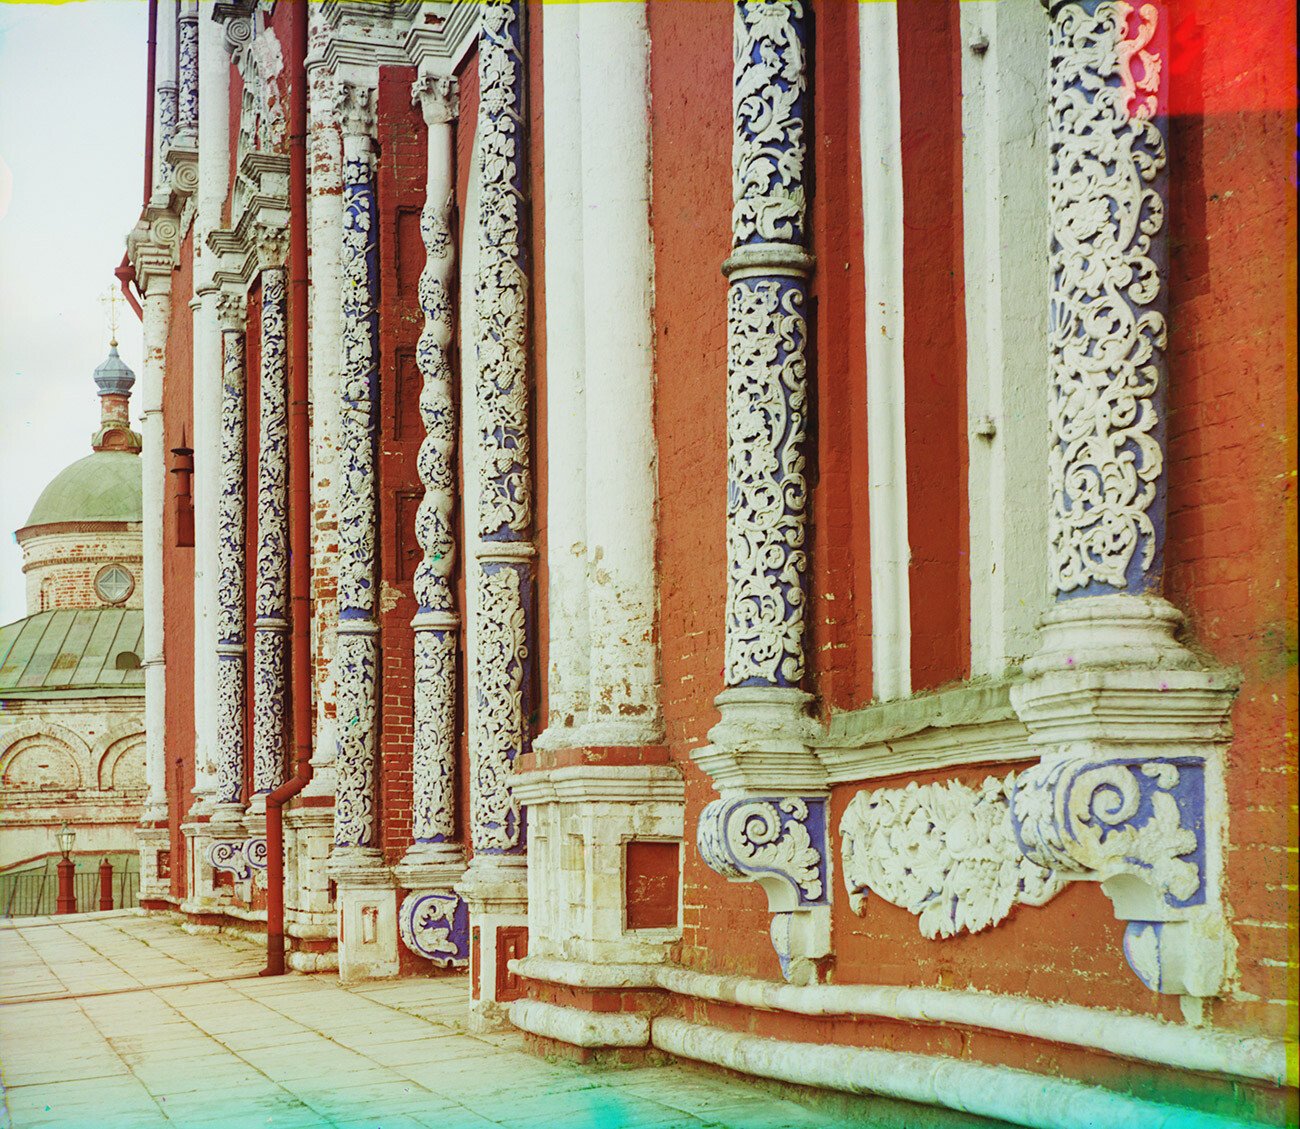 Ryazan Kremlin. Cathedral of the Dormition of the Virgin. North facade with carved limestone columns. Summer 1912